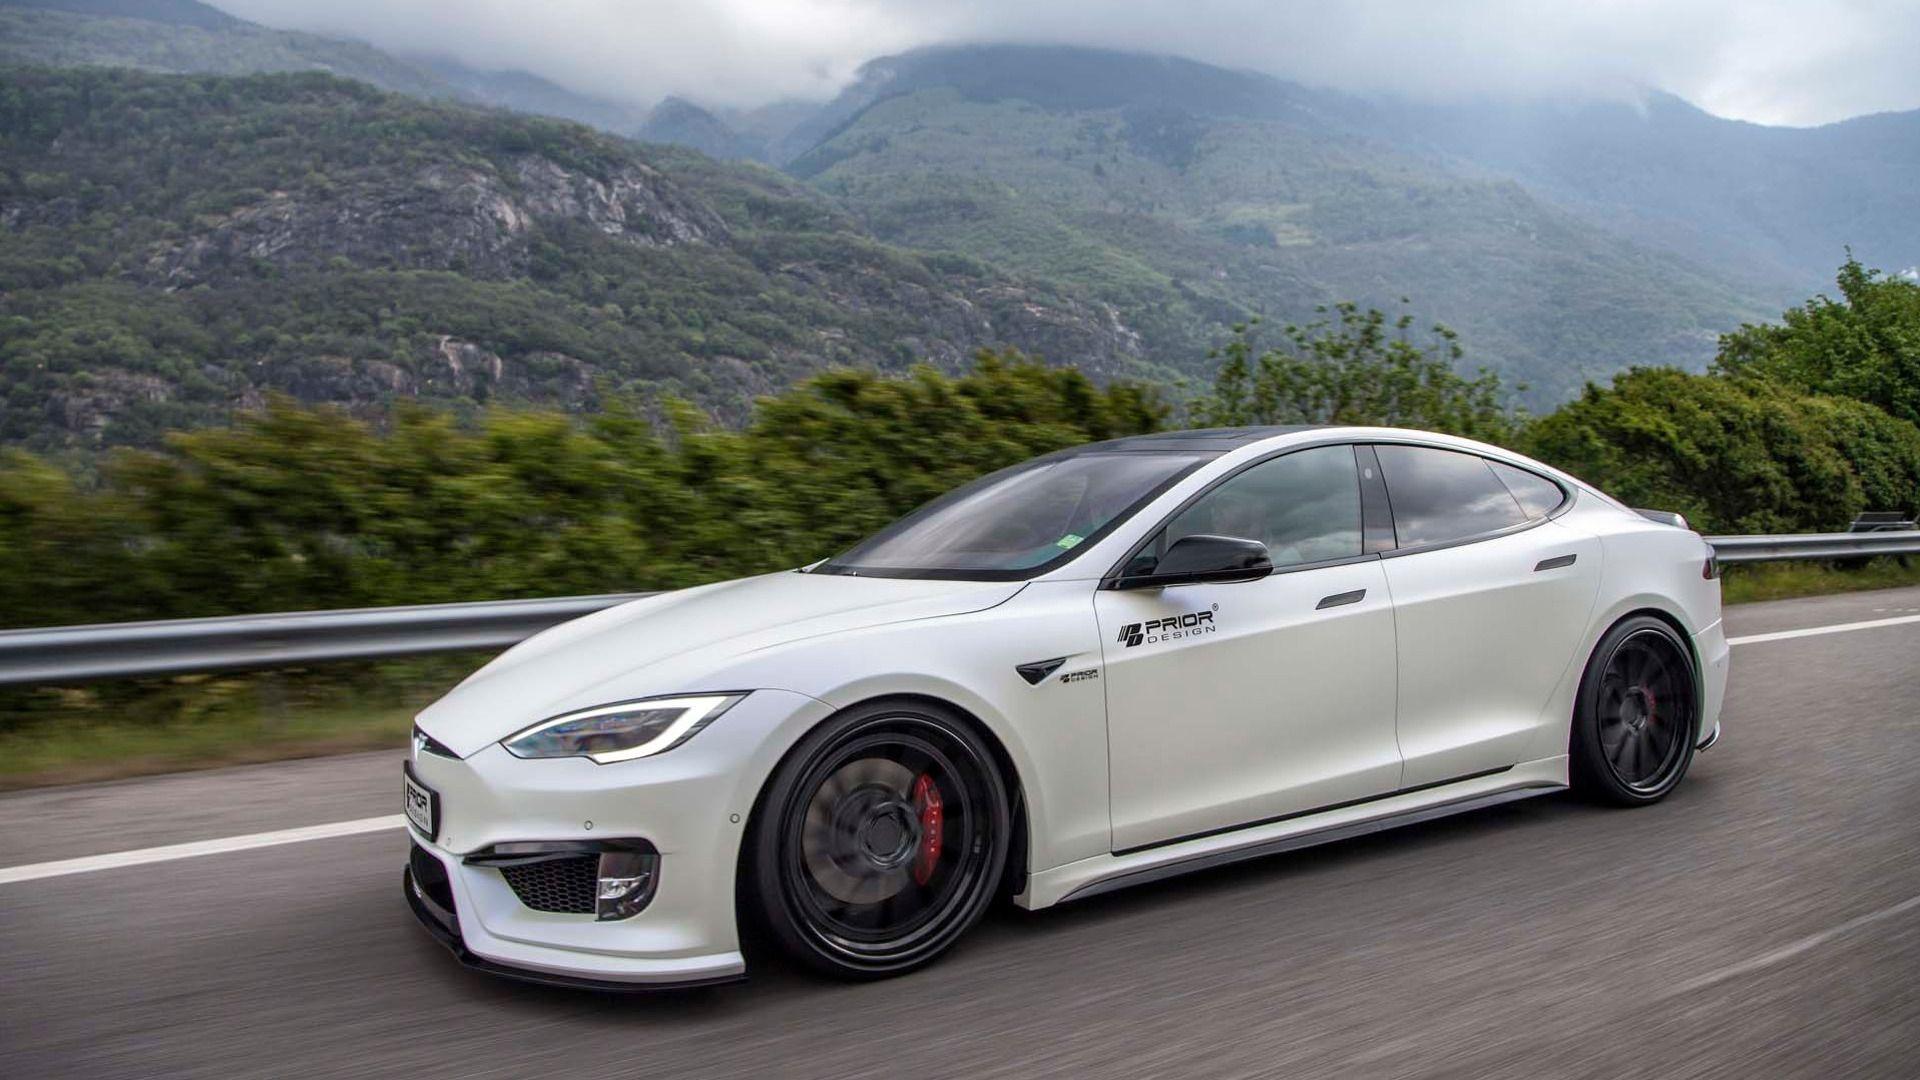 Tesla Model S Gets Aggressive Touch With Tuner's Aero Kit